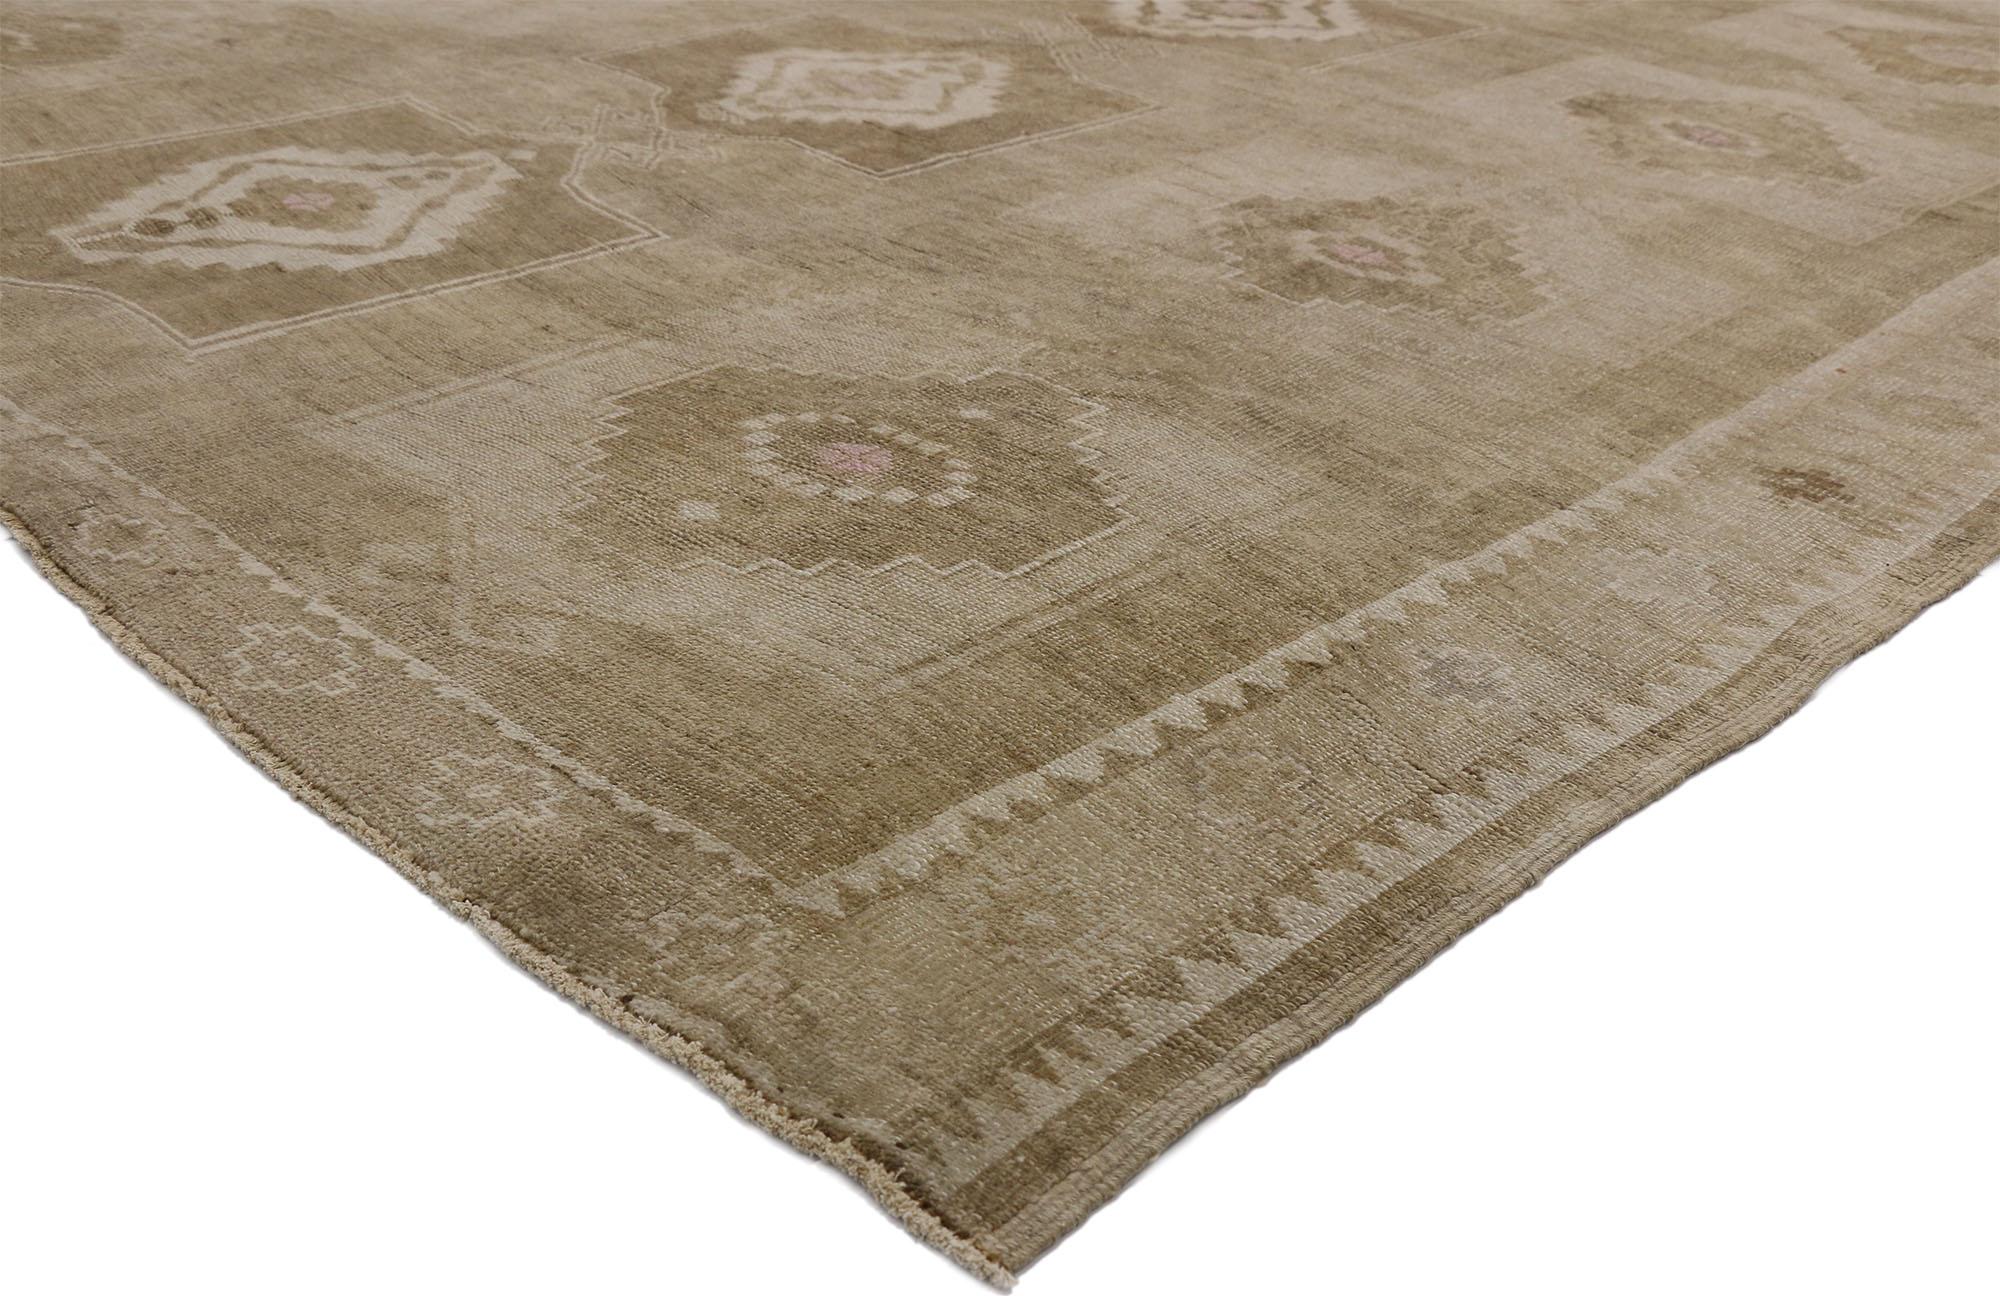 52456 Vintage Turkish Kars Rug with Modern Mission Style 10'00 x 10'08. This hand-knotted wool vintage Turkish Oushak rug features three columns of large-scale Kotchanak motifs filled with stepped medallions. Derived from the virility of the Ram's